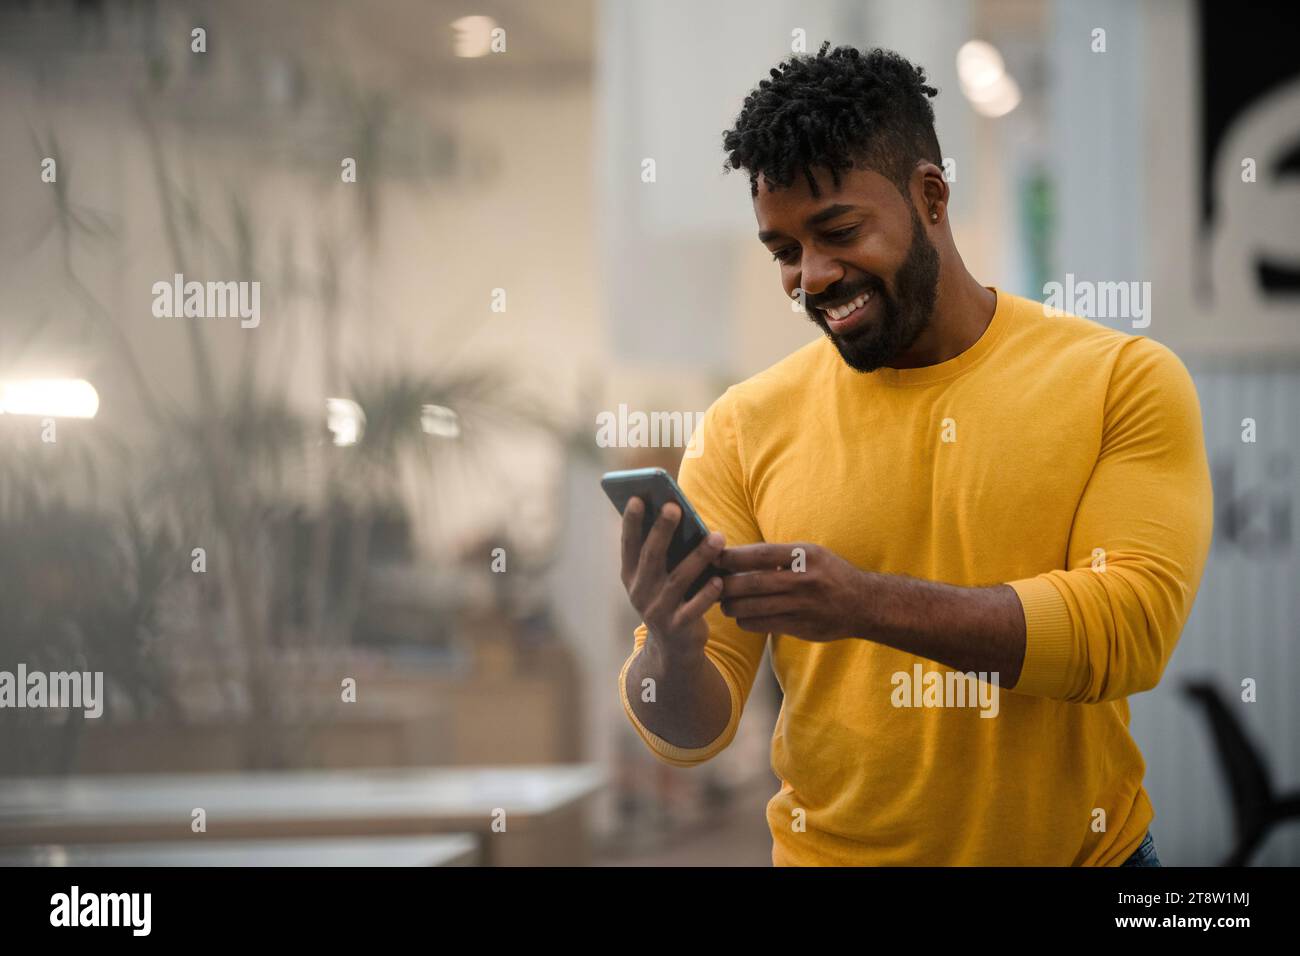 African American man using smart phone while leaning on table Stock Photo